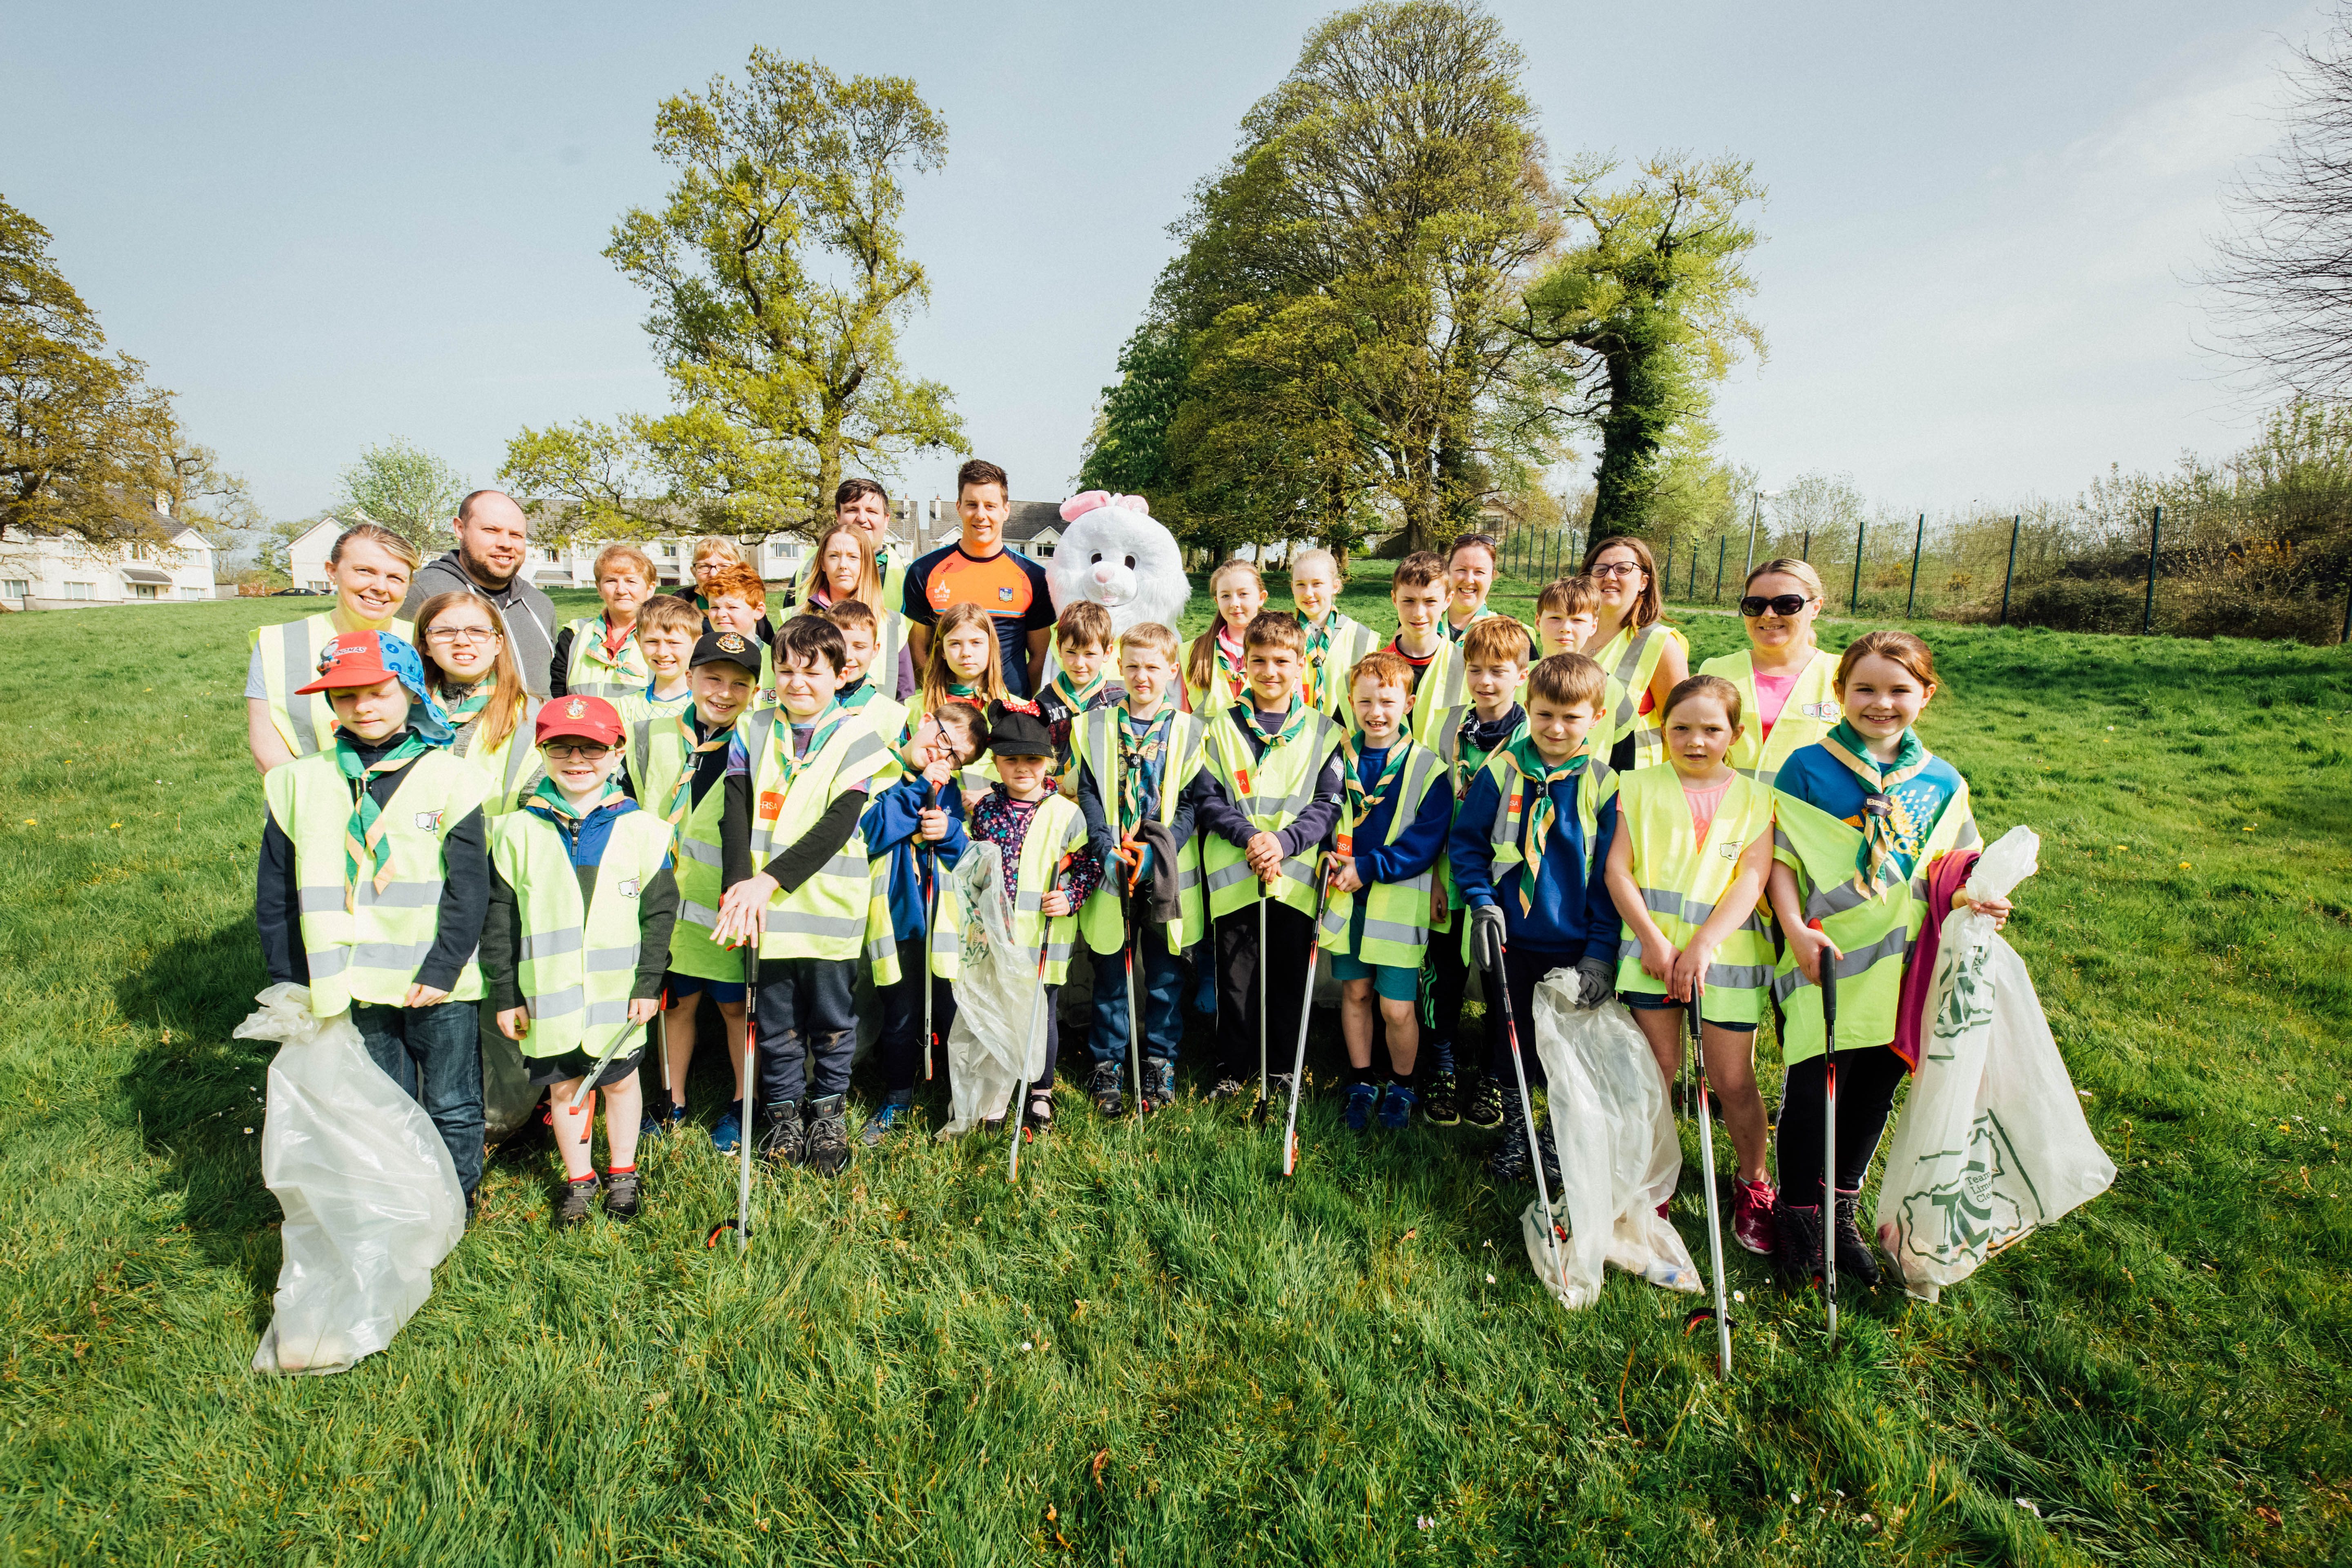 Limerick Hurler Dan Morrissey with the crew in Castleconnell pictured as part of the TLC Limerick Clean Up of 2019.
Pic. Brian Arthur